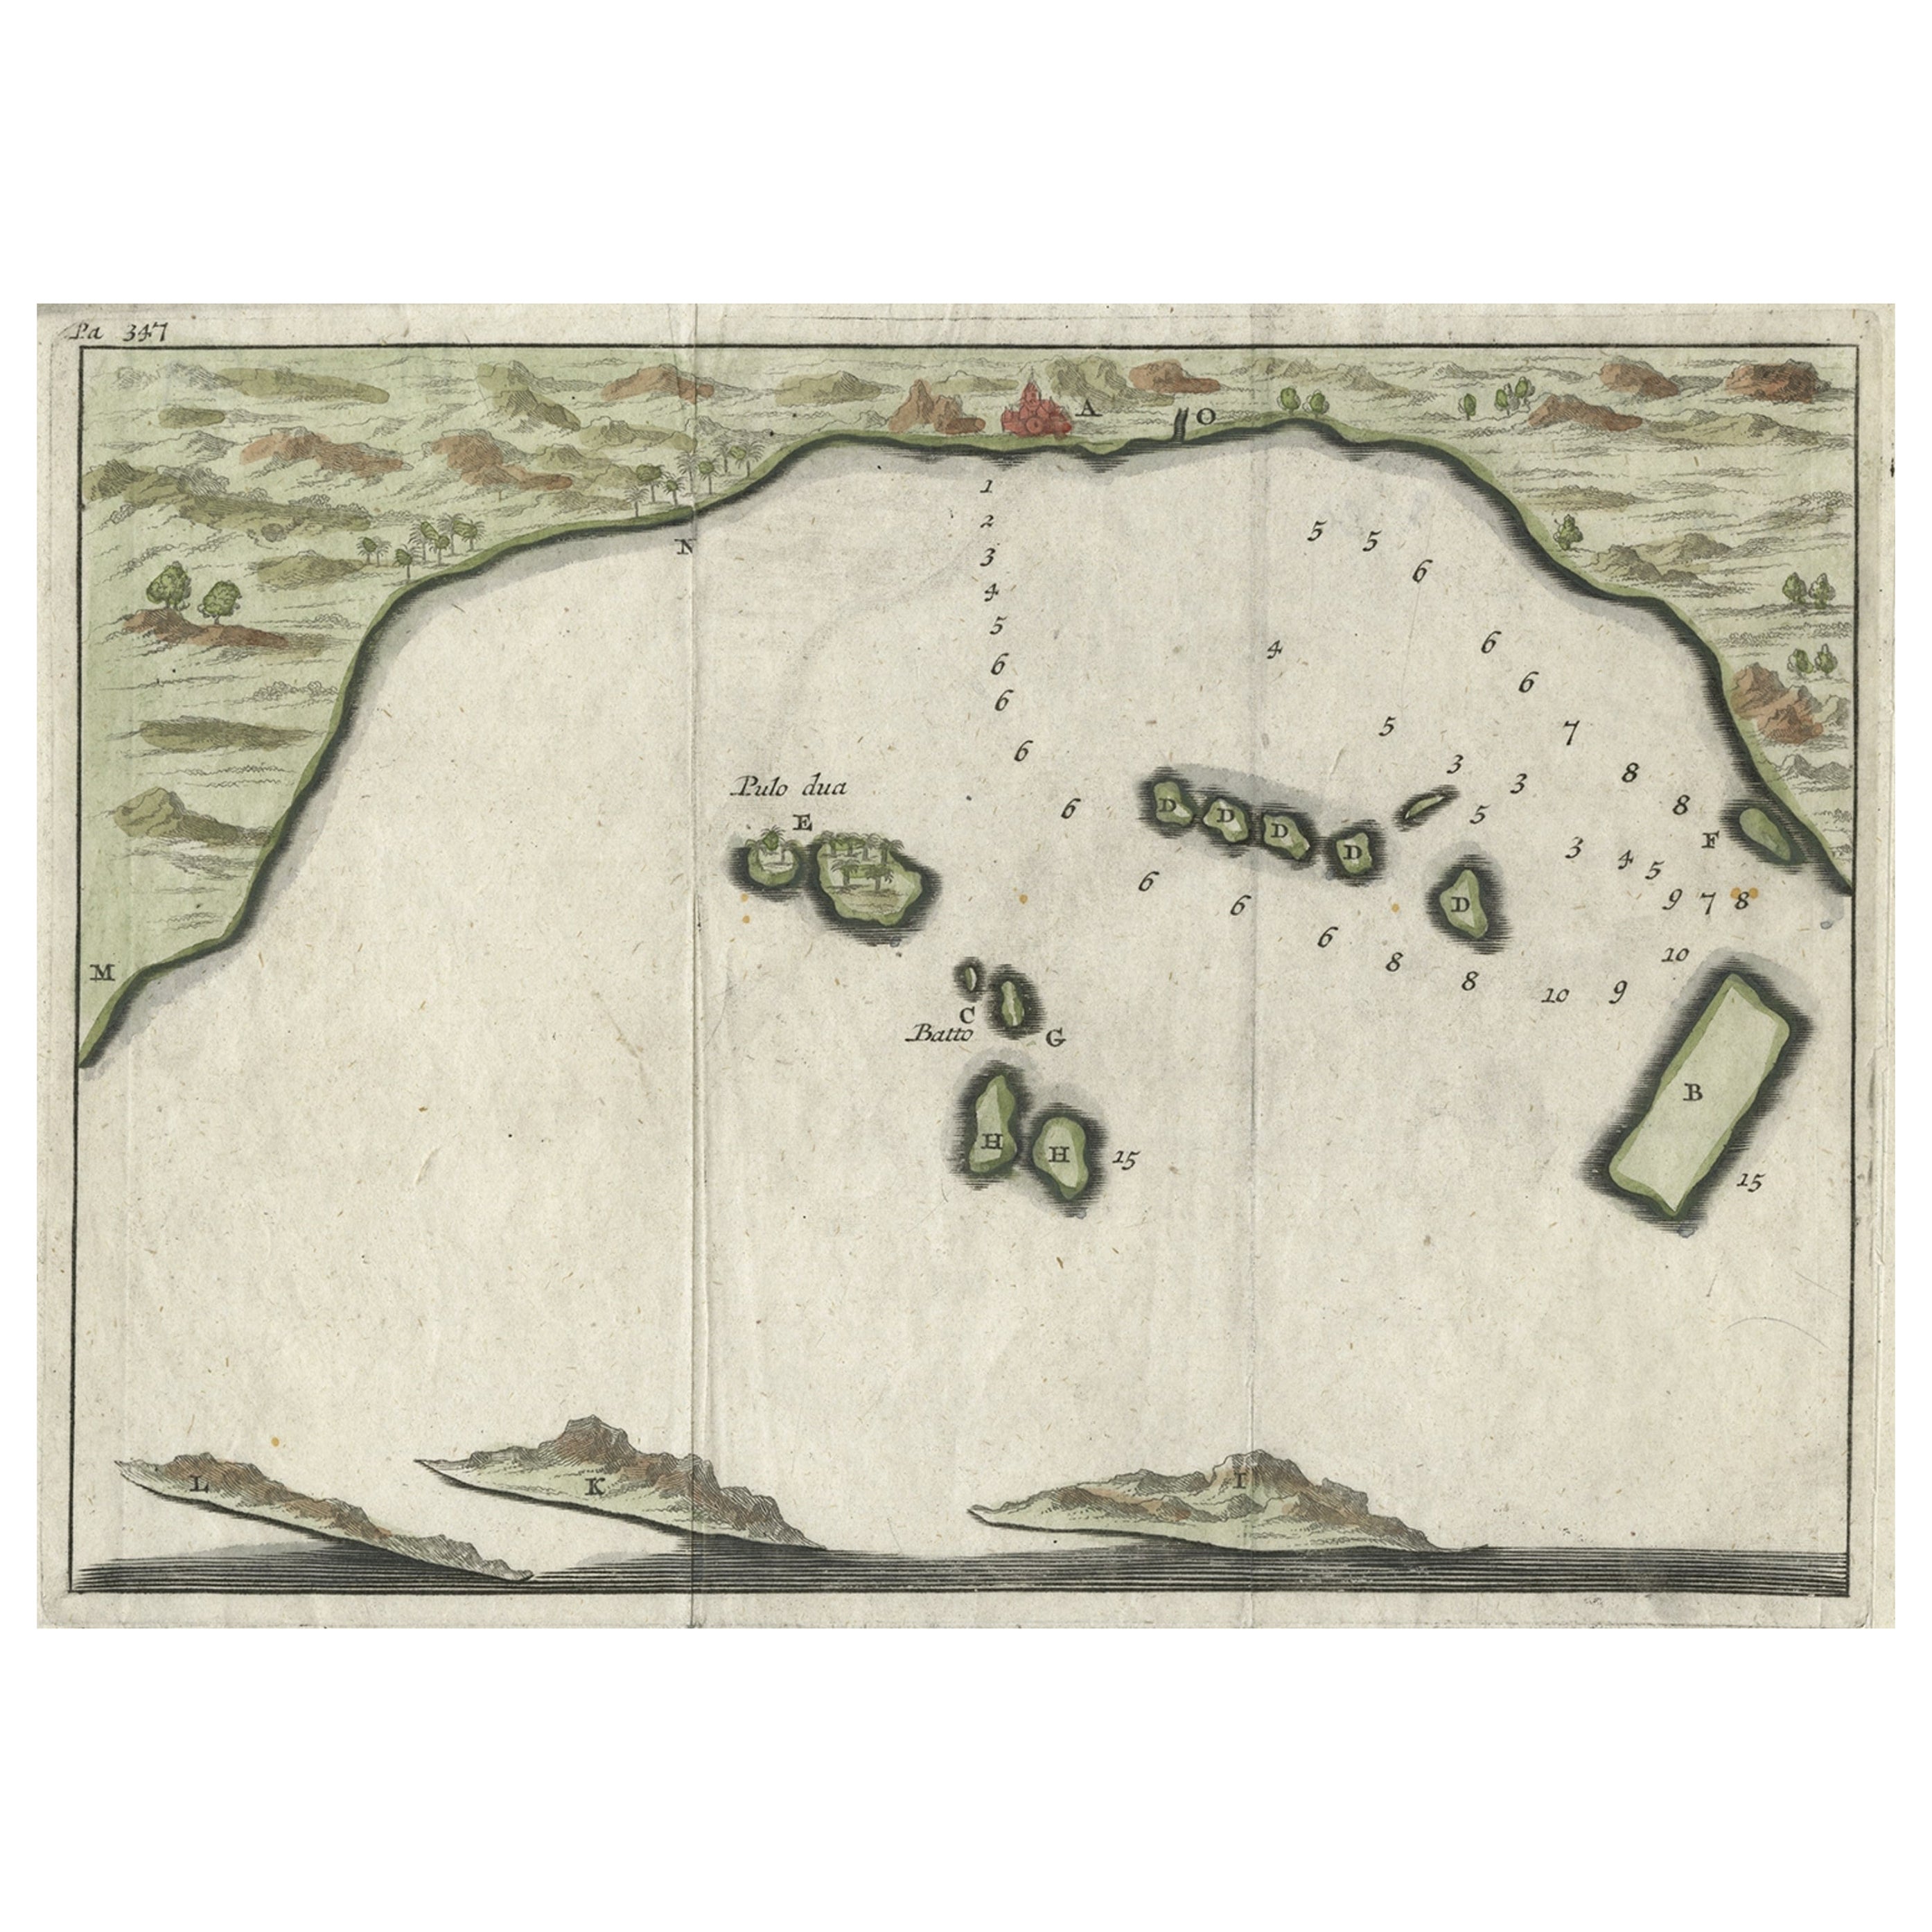 Small Early 18th Century Map of Banten Bay on the Island Java, Indonesia, c.1725